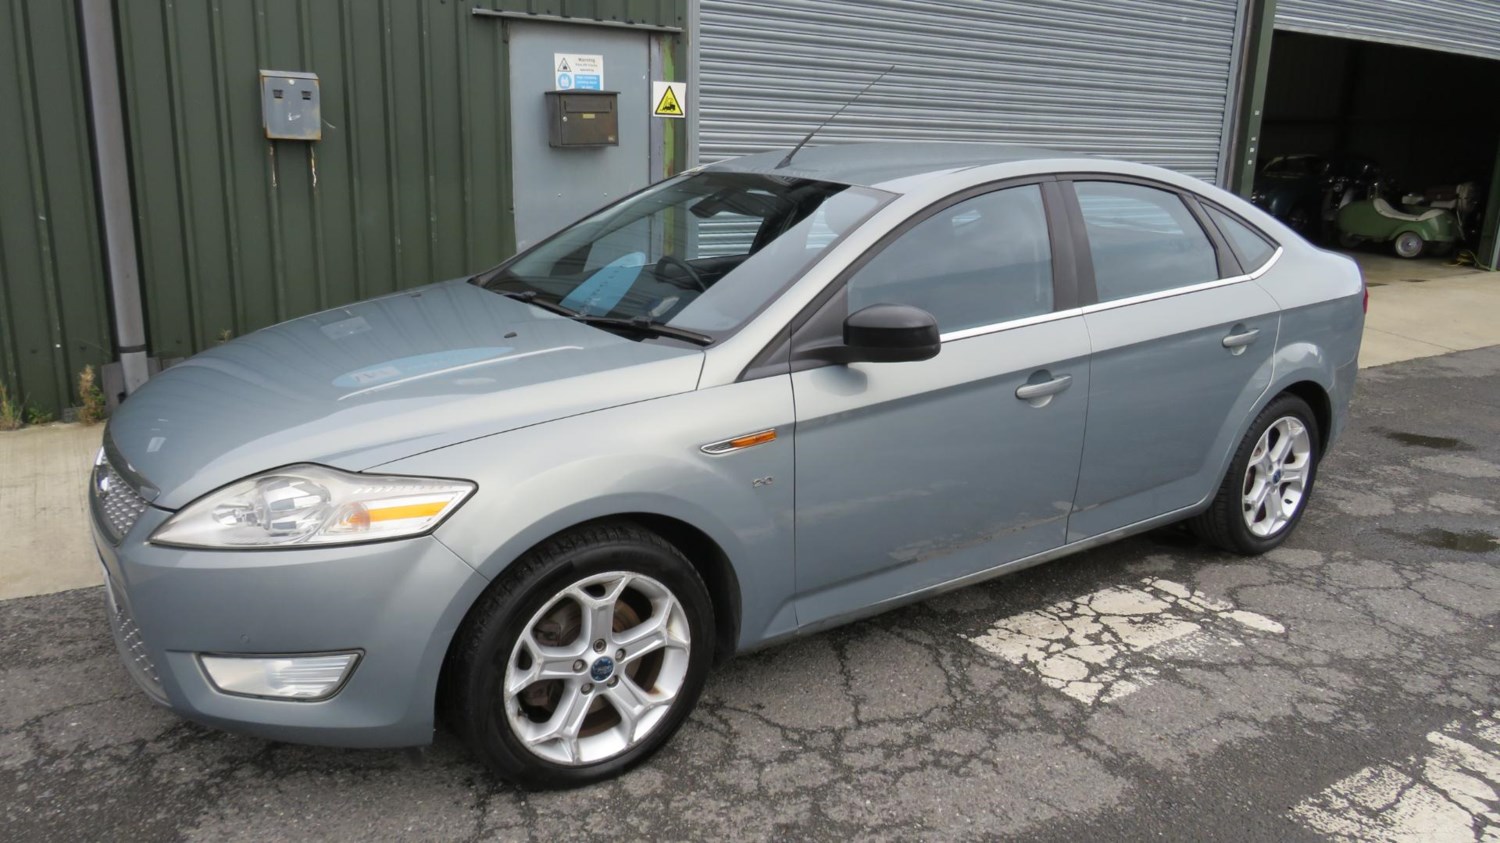 2010 (10) Ford Mondeo 2.0 TDCi TITANIUM X 5 DOOR For Sale In Bashley, Hampshire